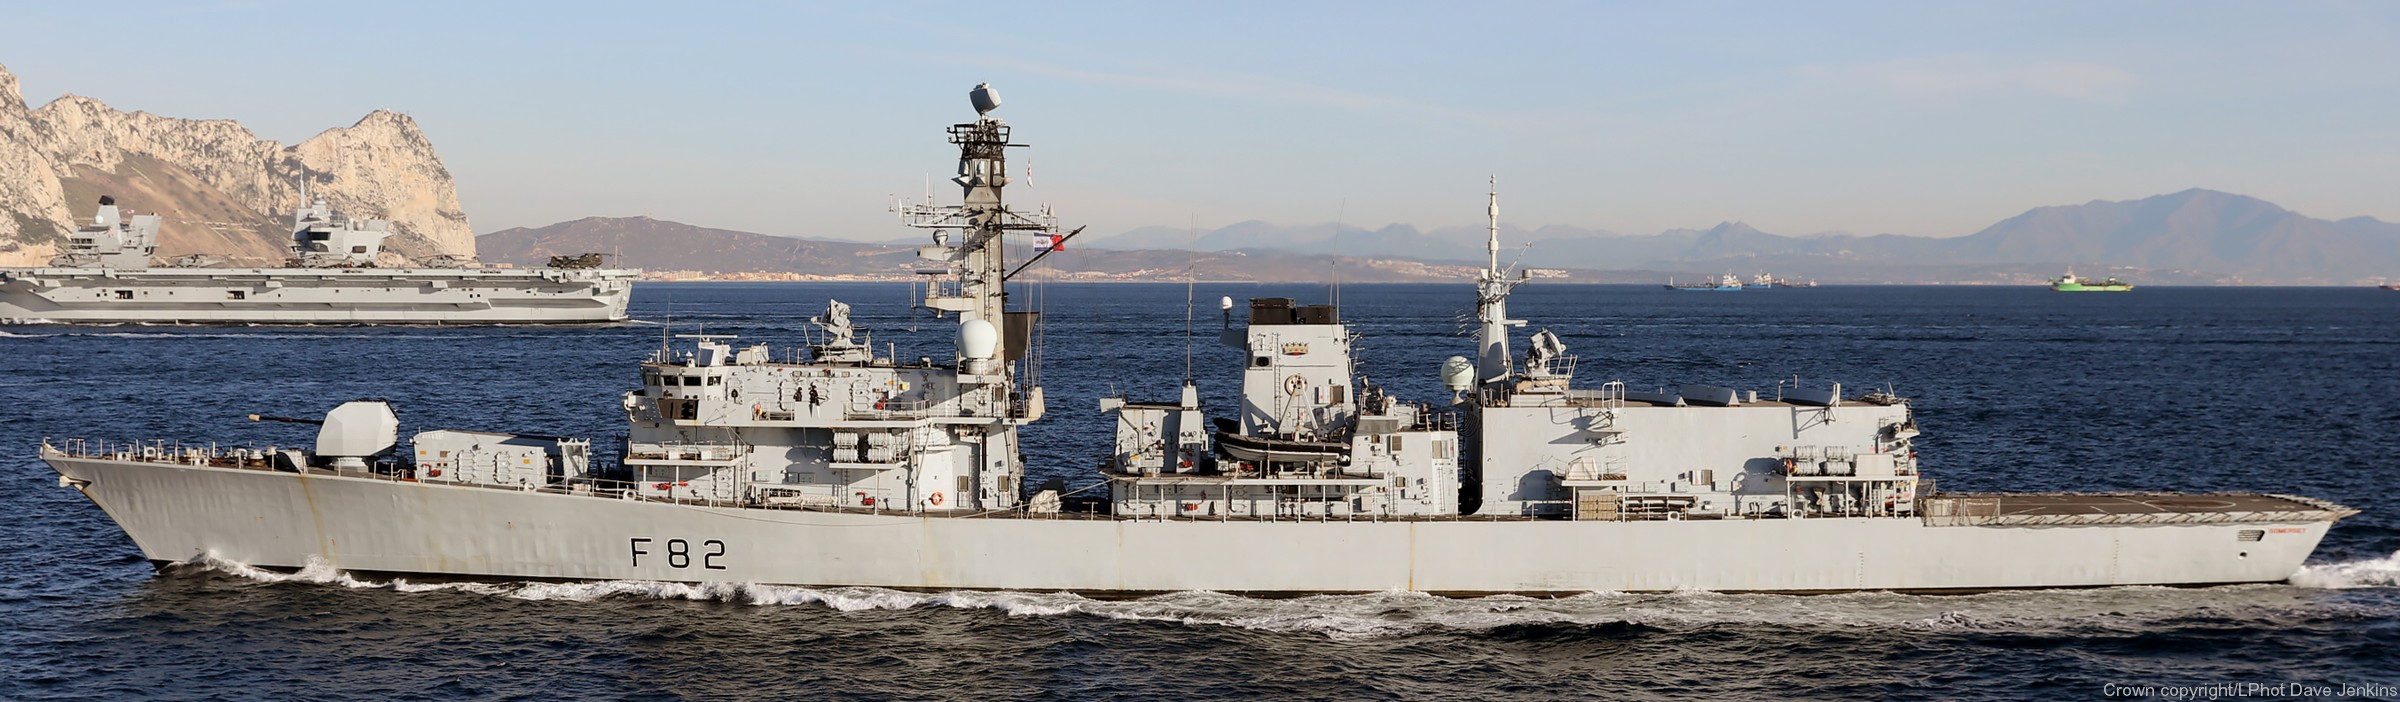 f-82 hms somerset type 23 duke class guided missile frigate ffg royal navy 34